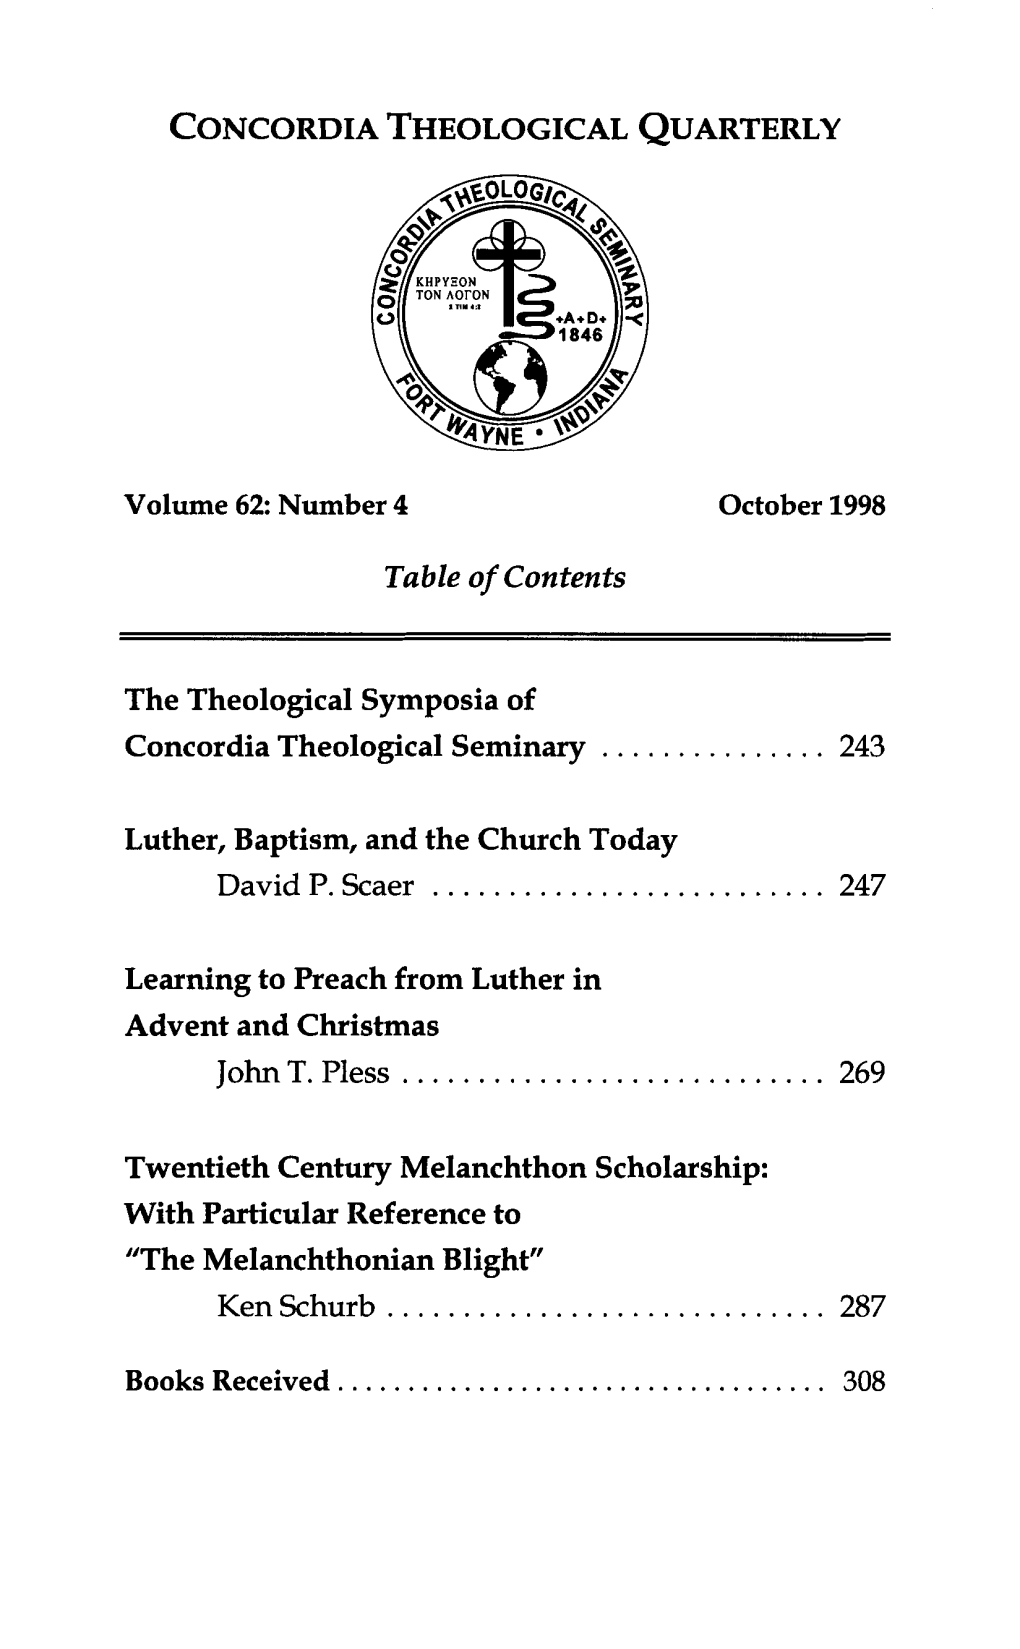 Luther, Baptism, and the Church Today David P